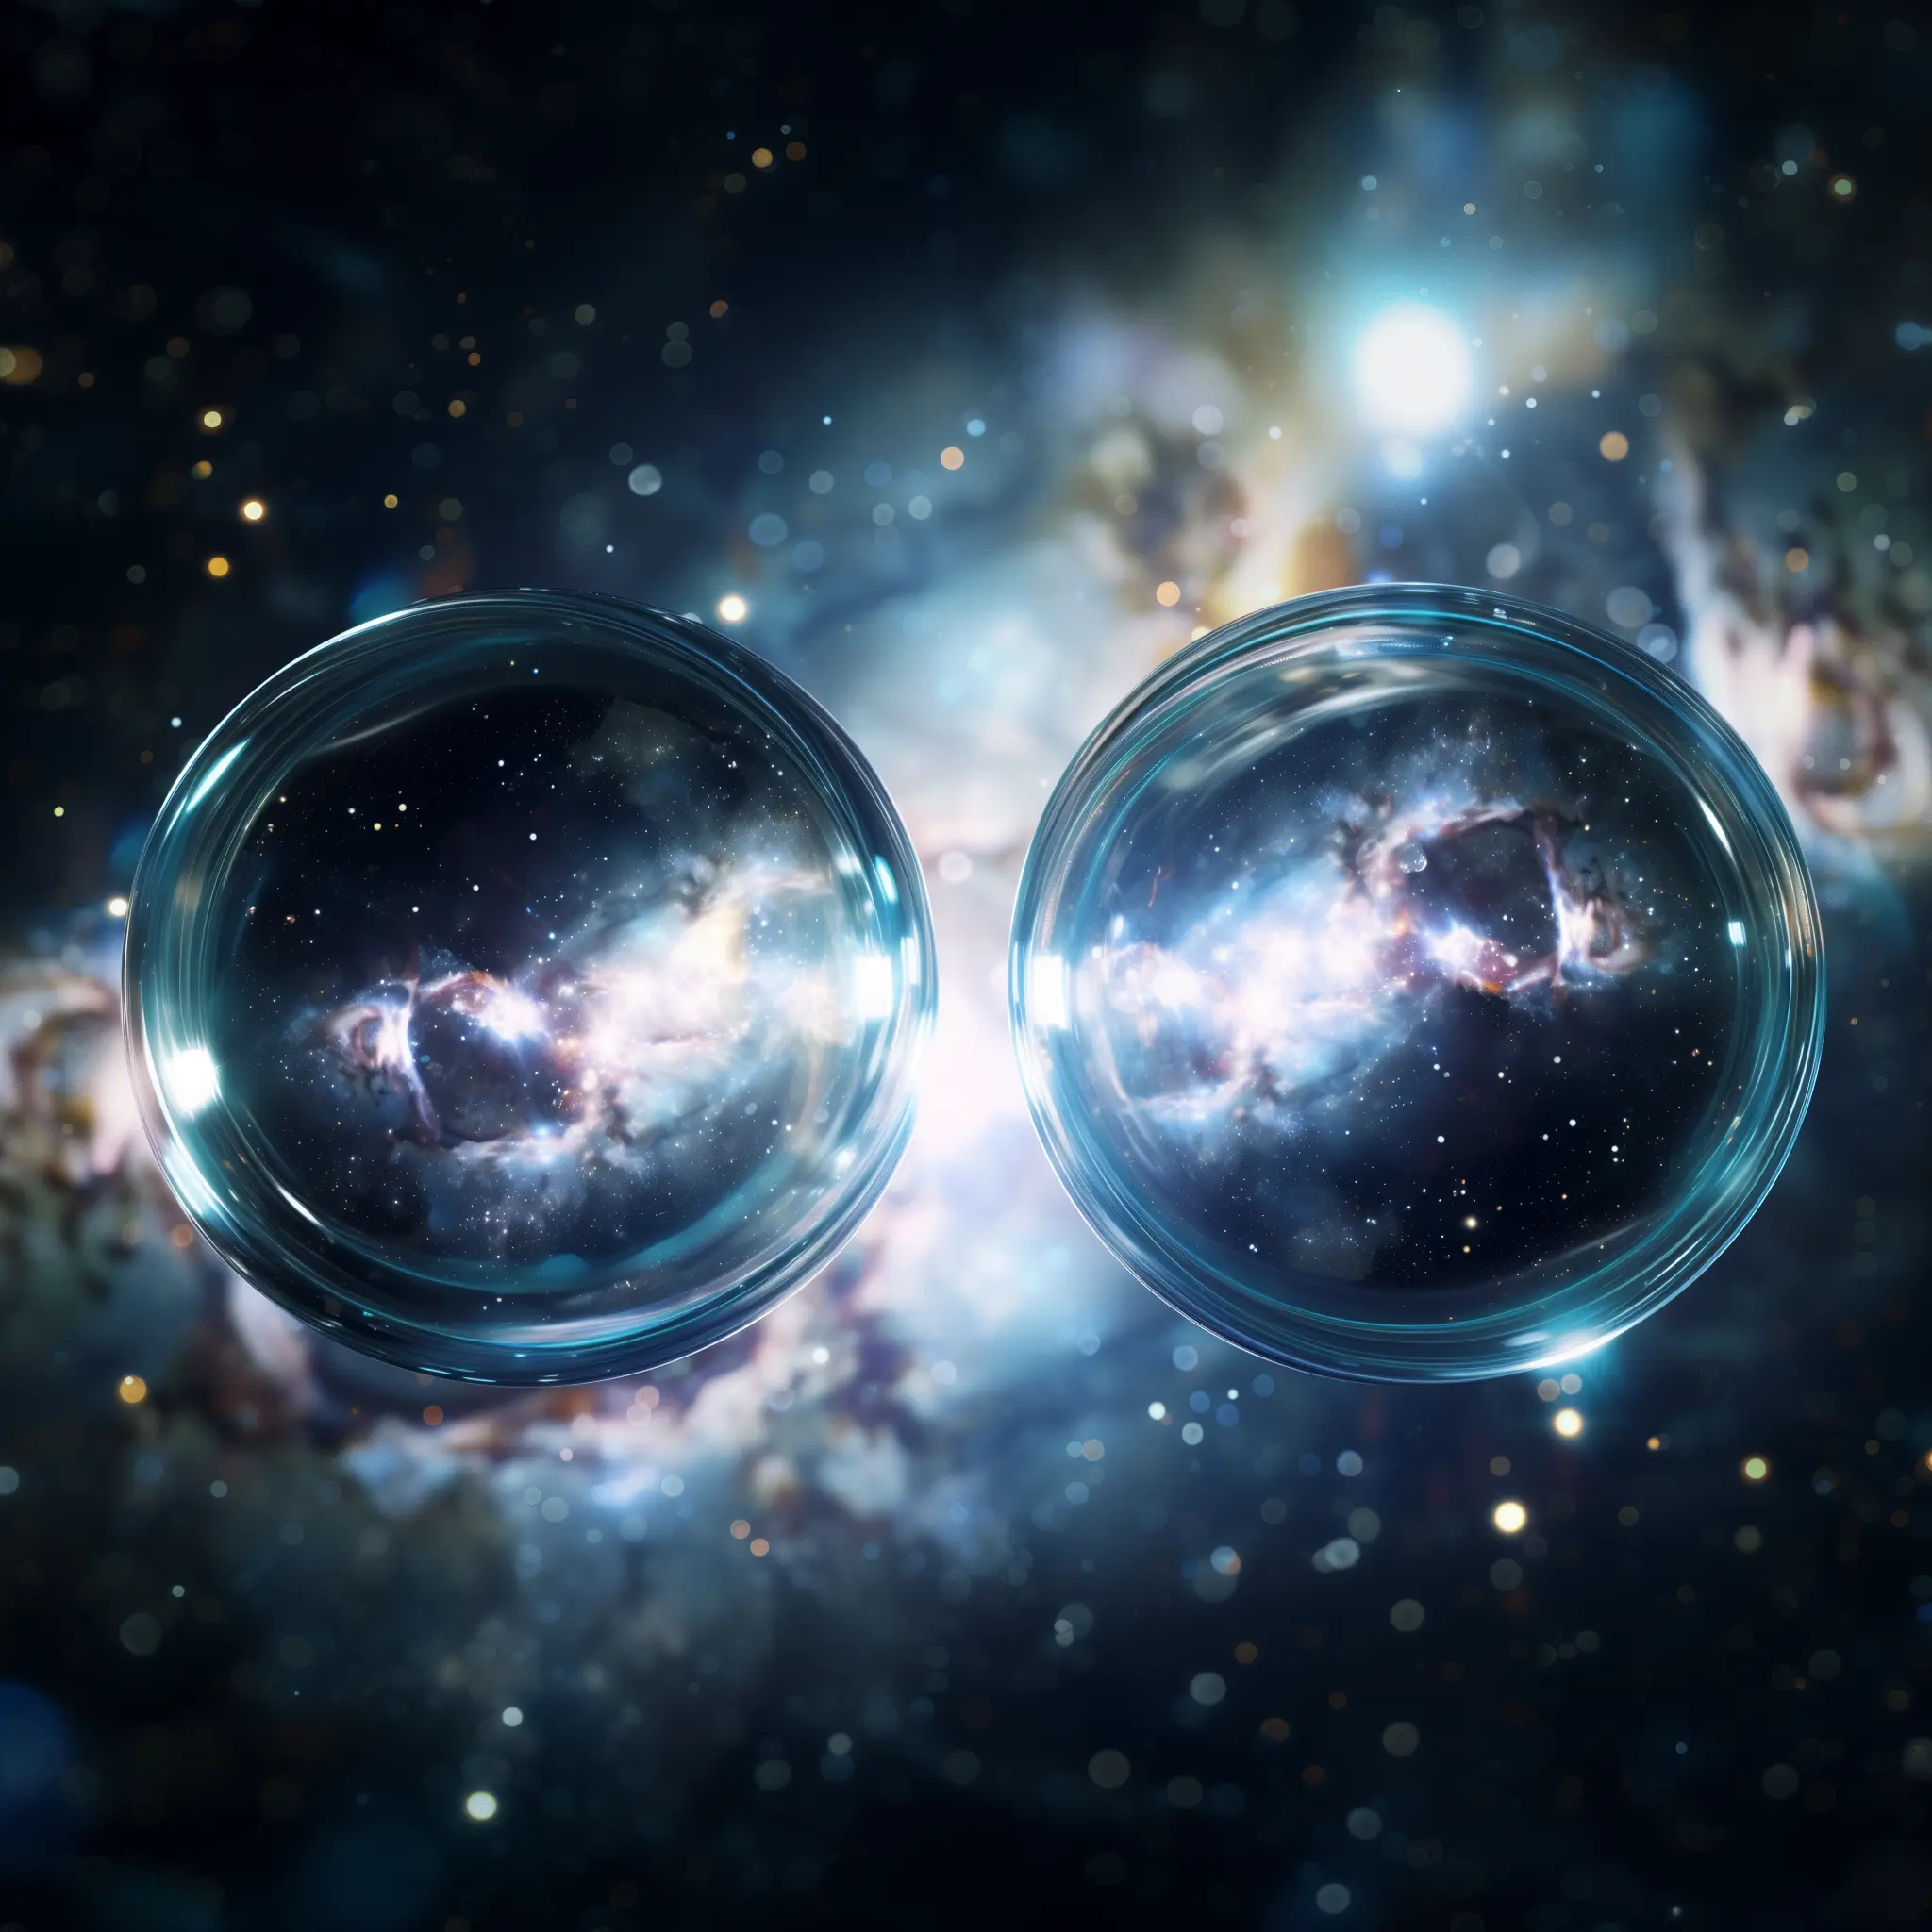 An abstract visualization of two transparent spheres reminiscent of glasses over a galaxy filled with stars and nebulae.